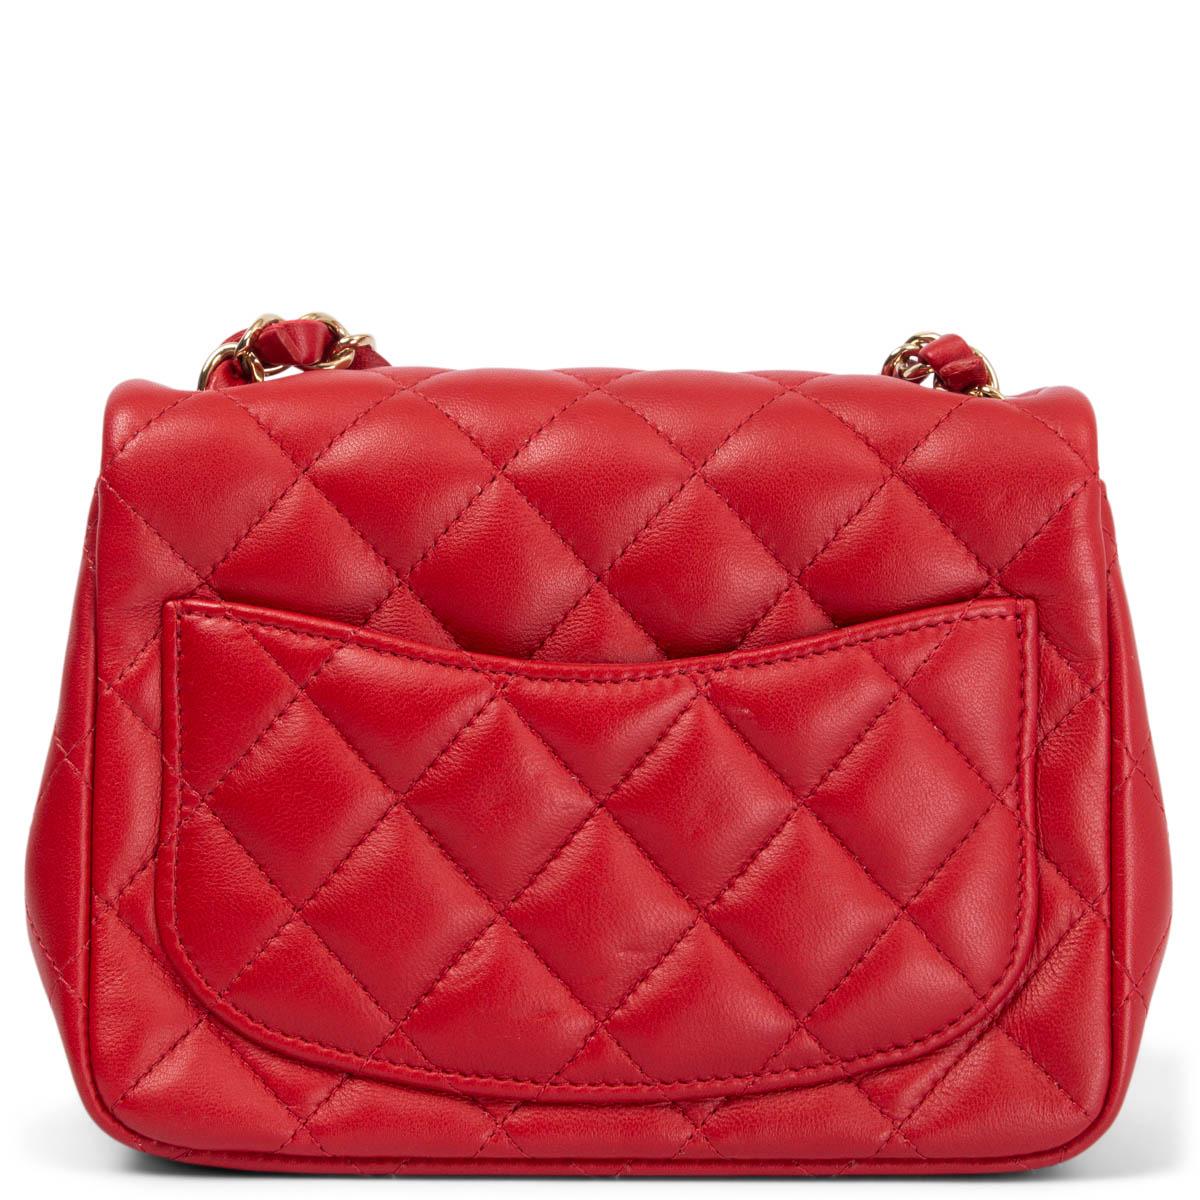 Women's CHANEL red quilted leather 2020 20S MINI SQUARE FLAP Shoulder Bag